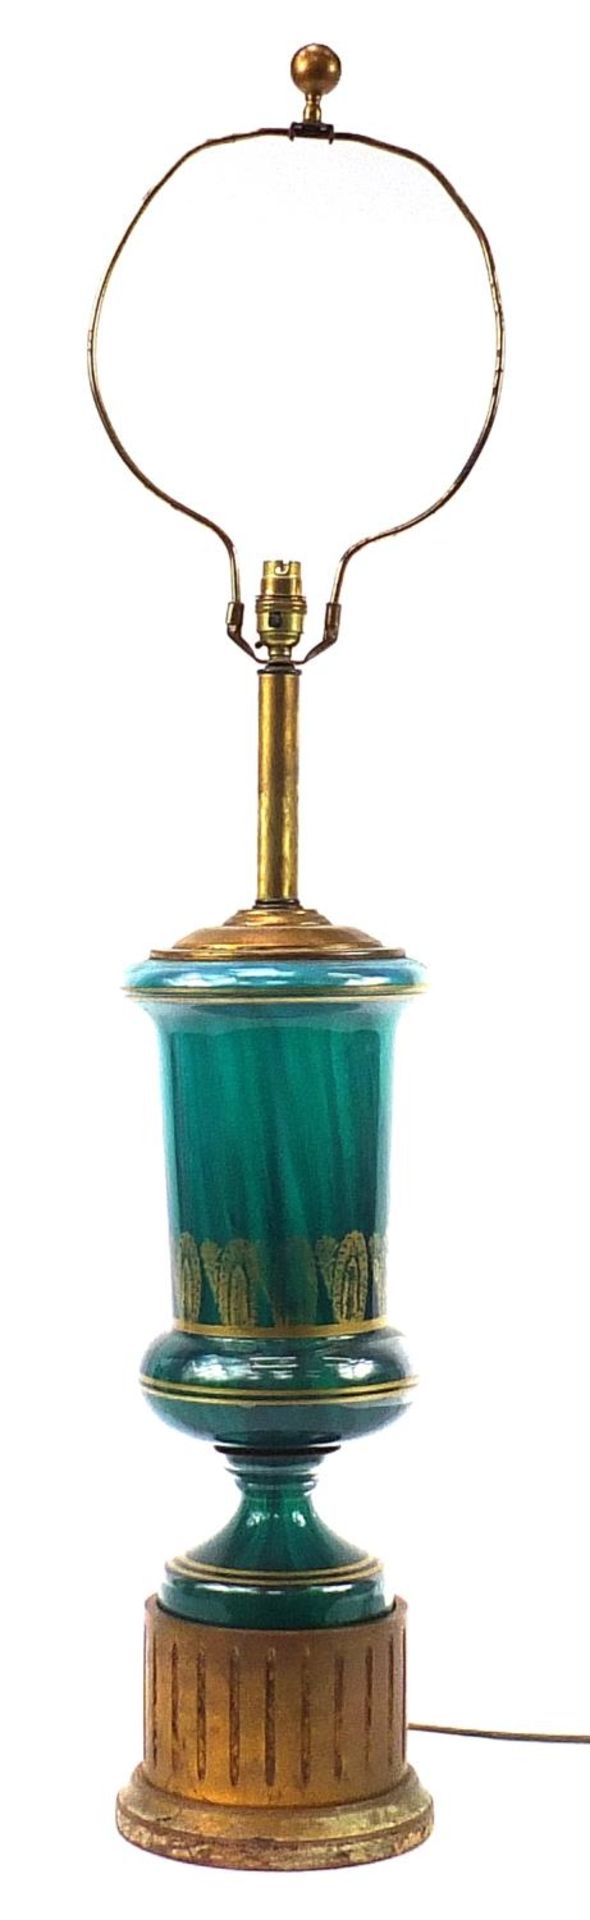 Green glass table lamp with gilded decoration and column base, 107cm high